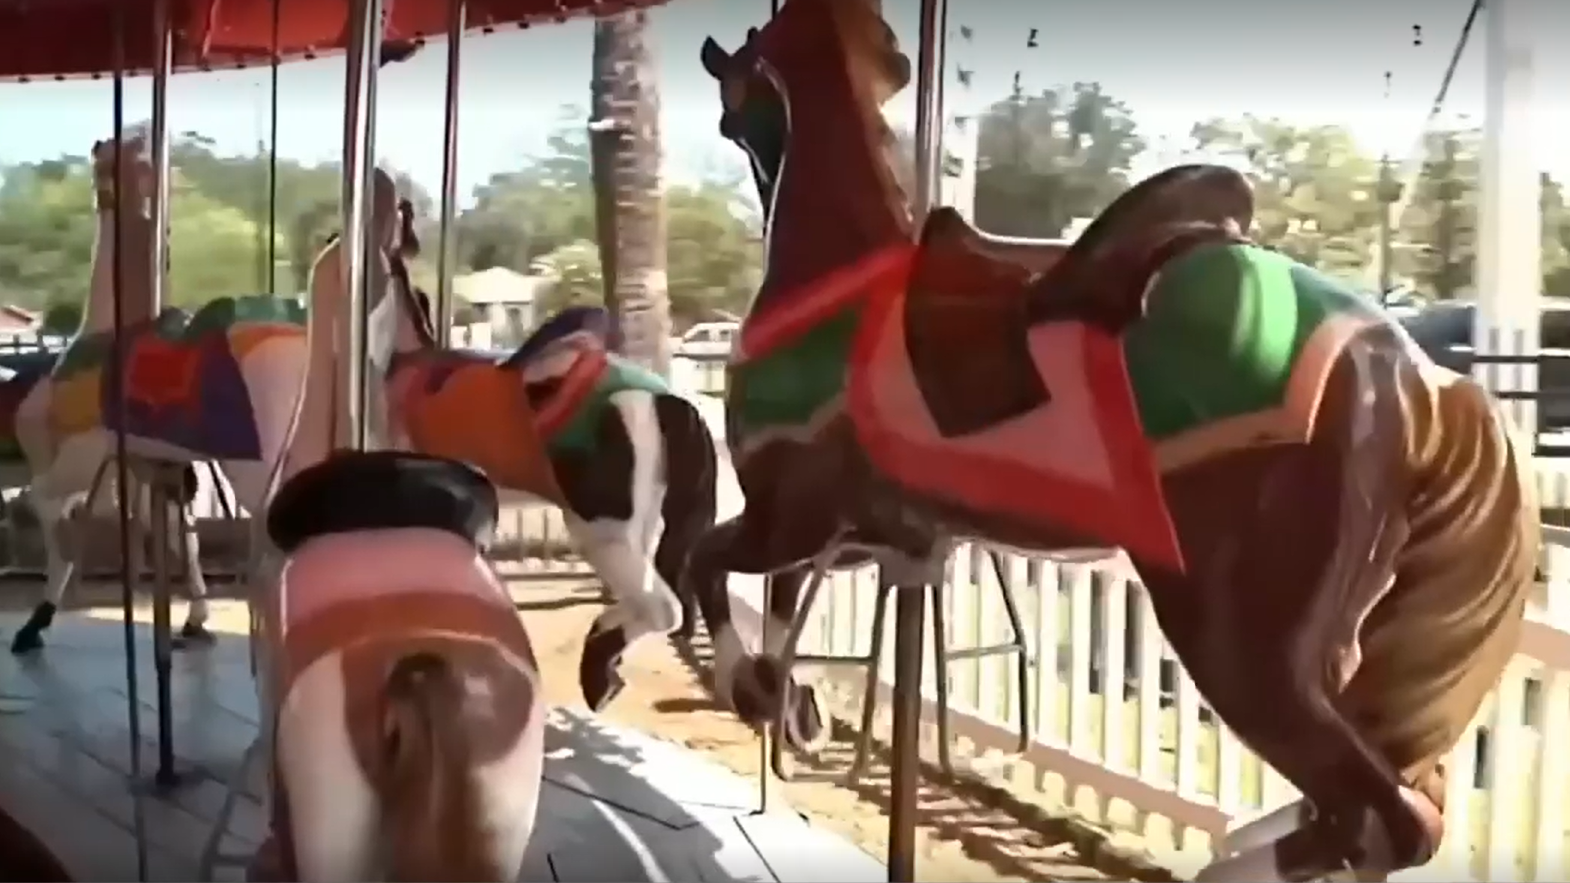 Featured image for “The St. Augustine carousel may come around again”